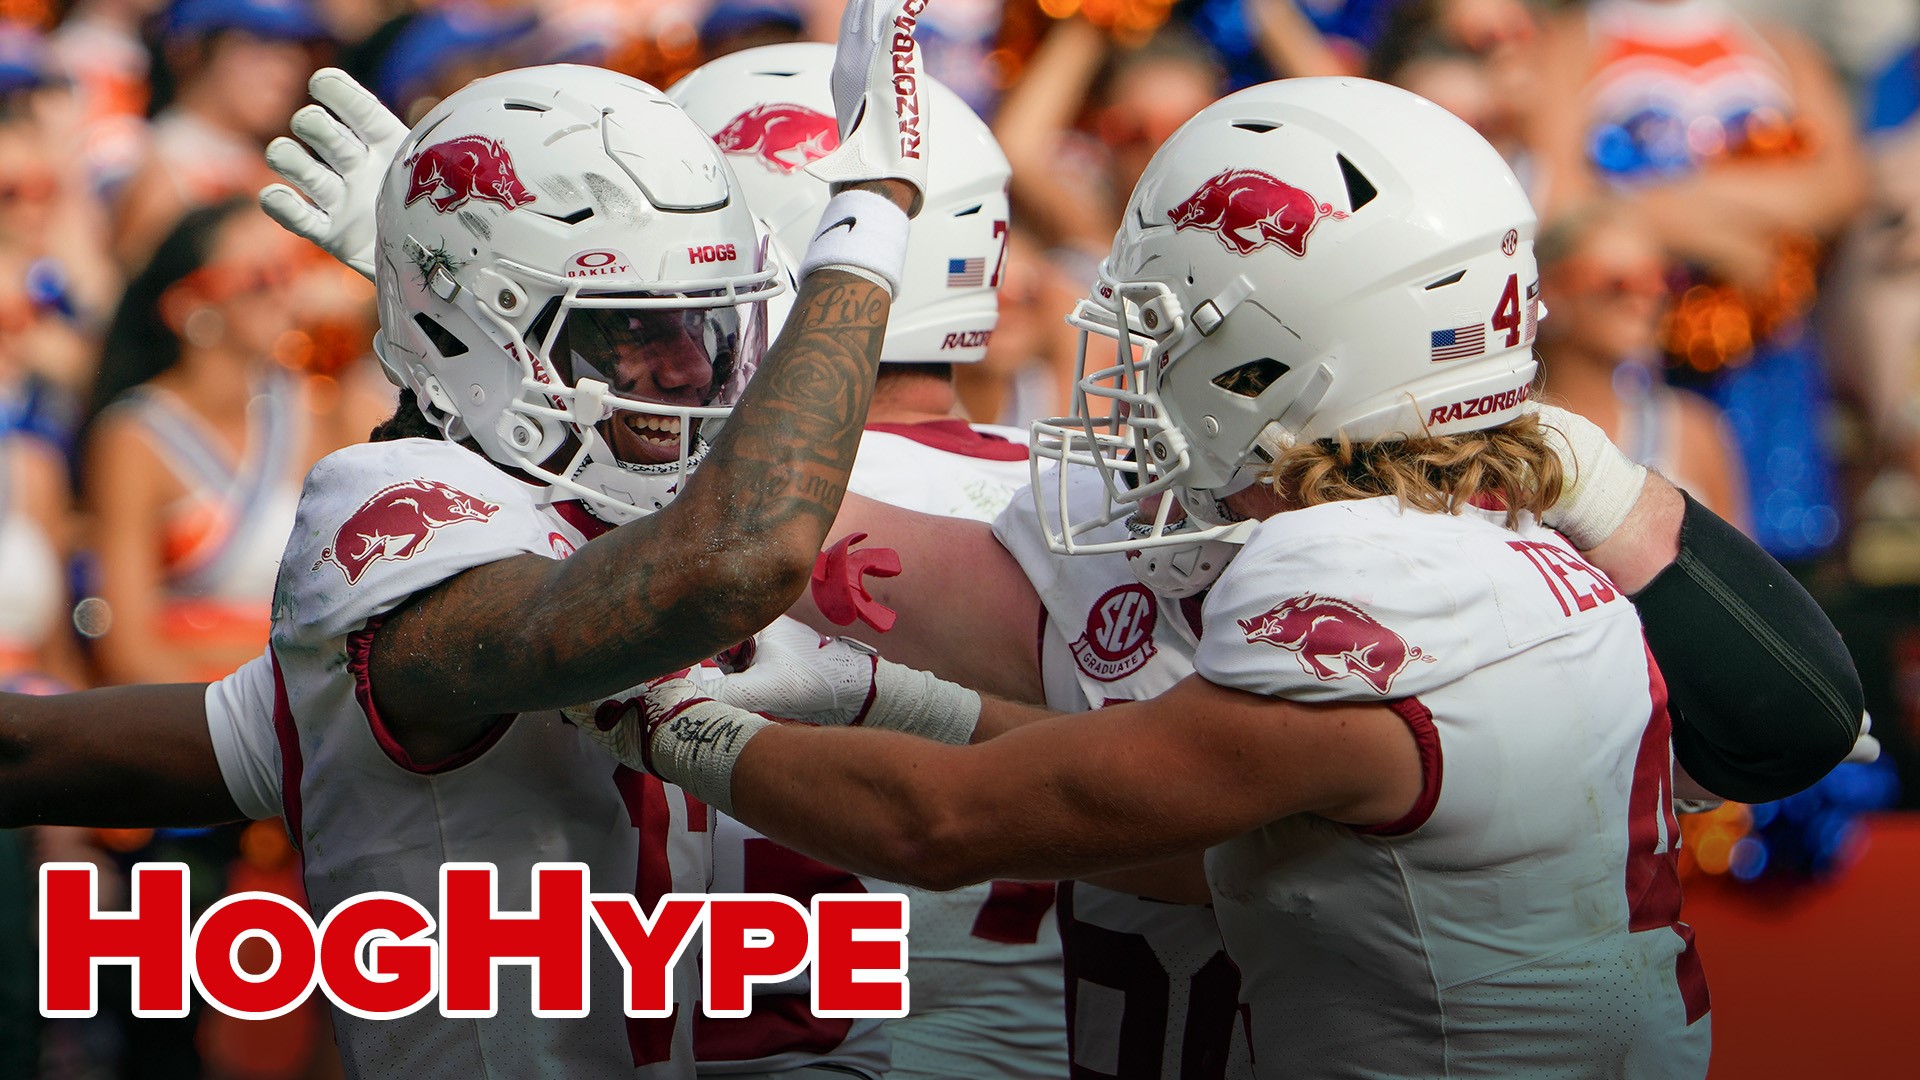 Fresh off a big win against Florida, the Hogs are returning back to Arkansas eyeing their second SEC win in a clash against the Auburn Tigers.